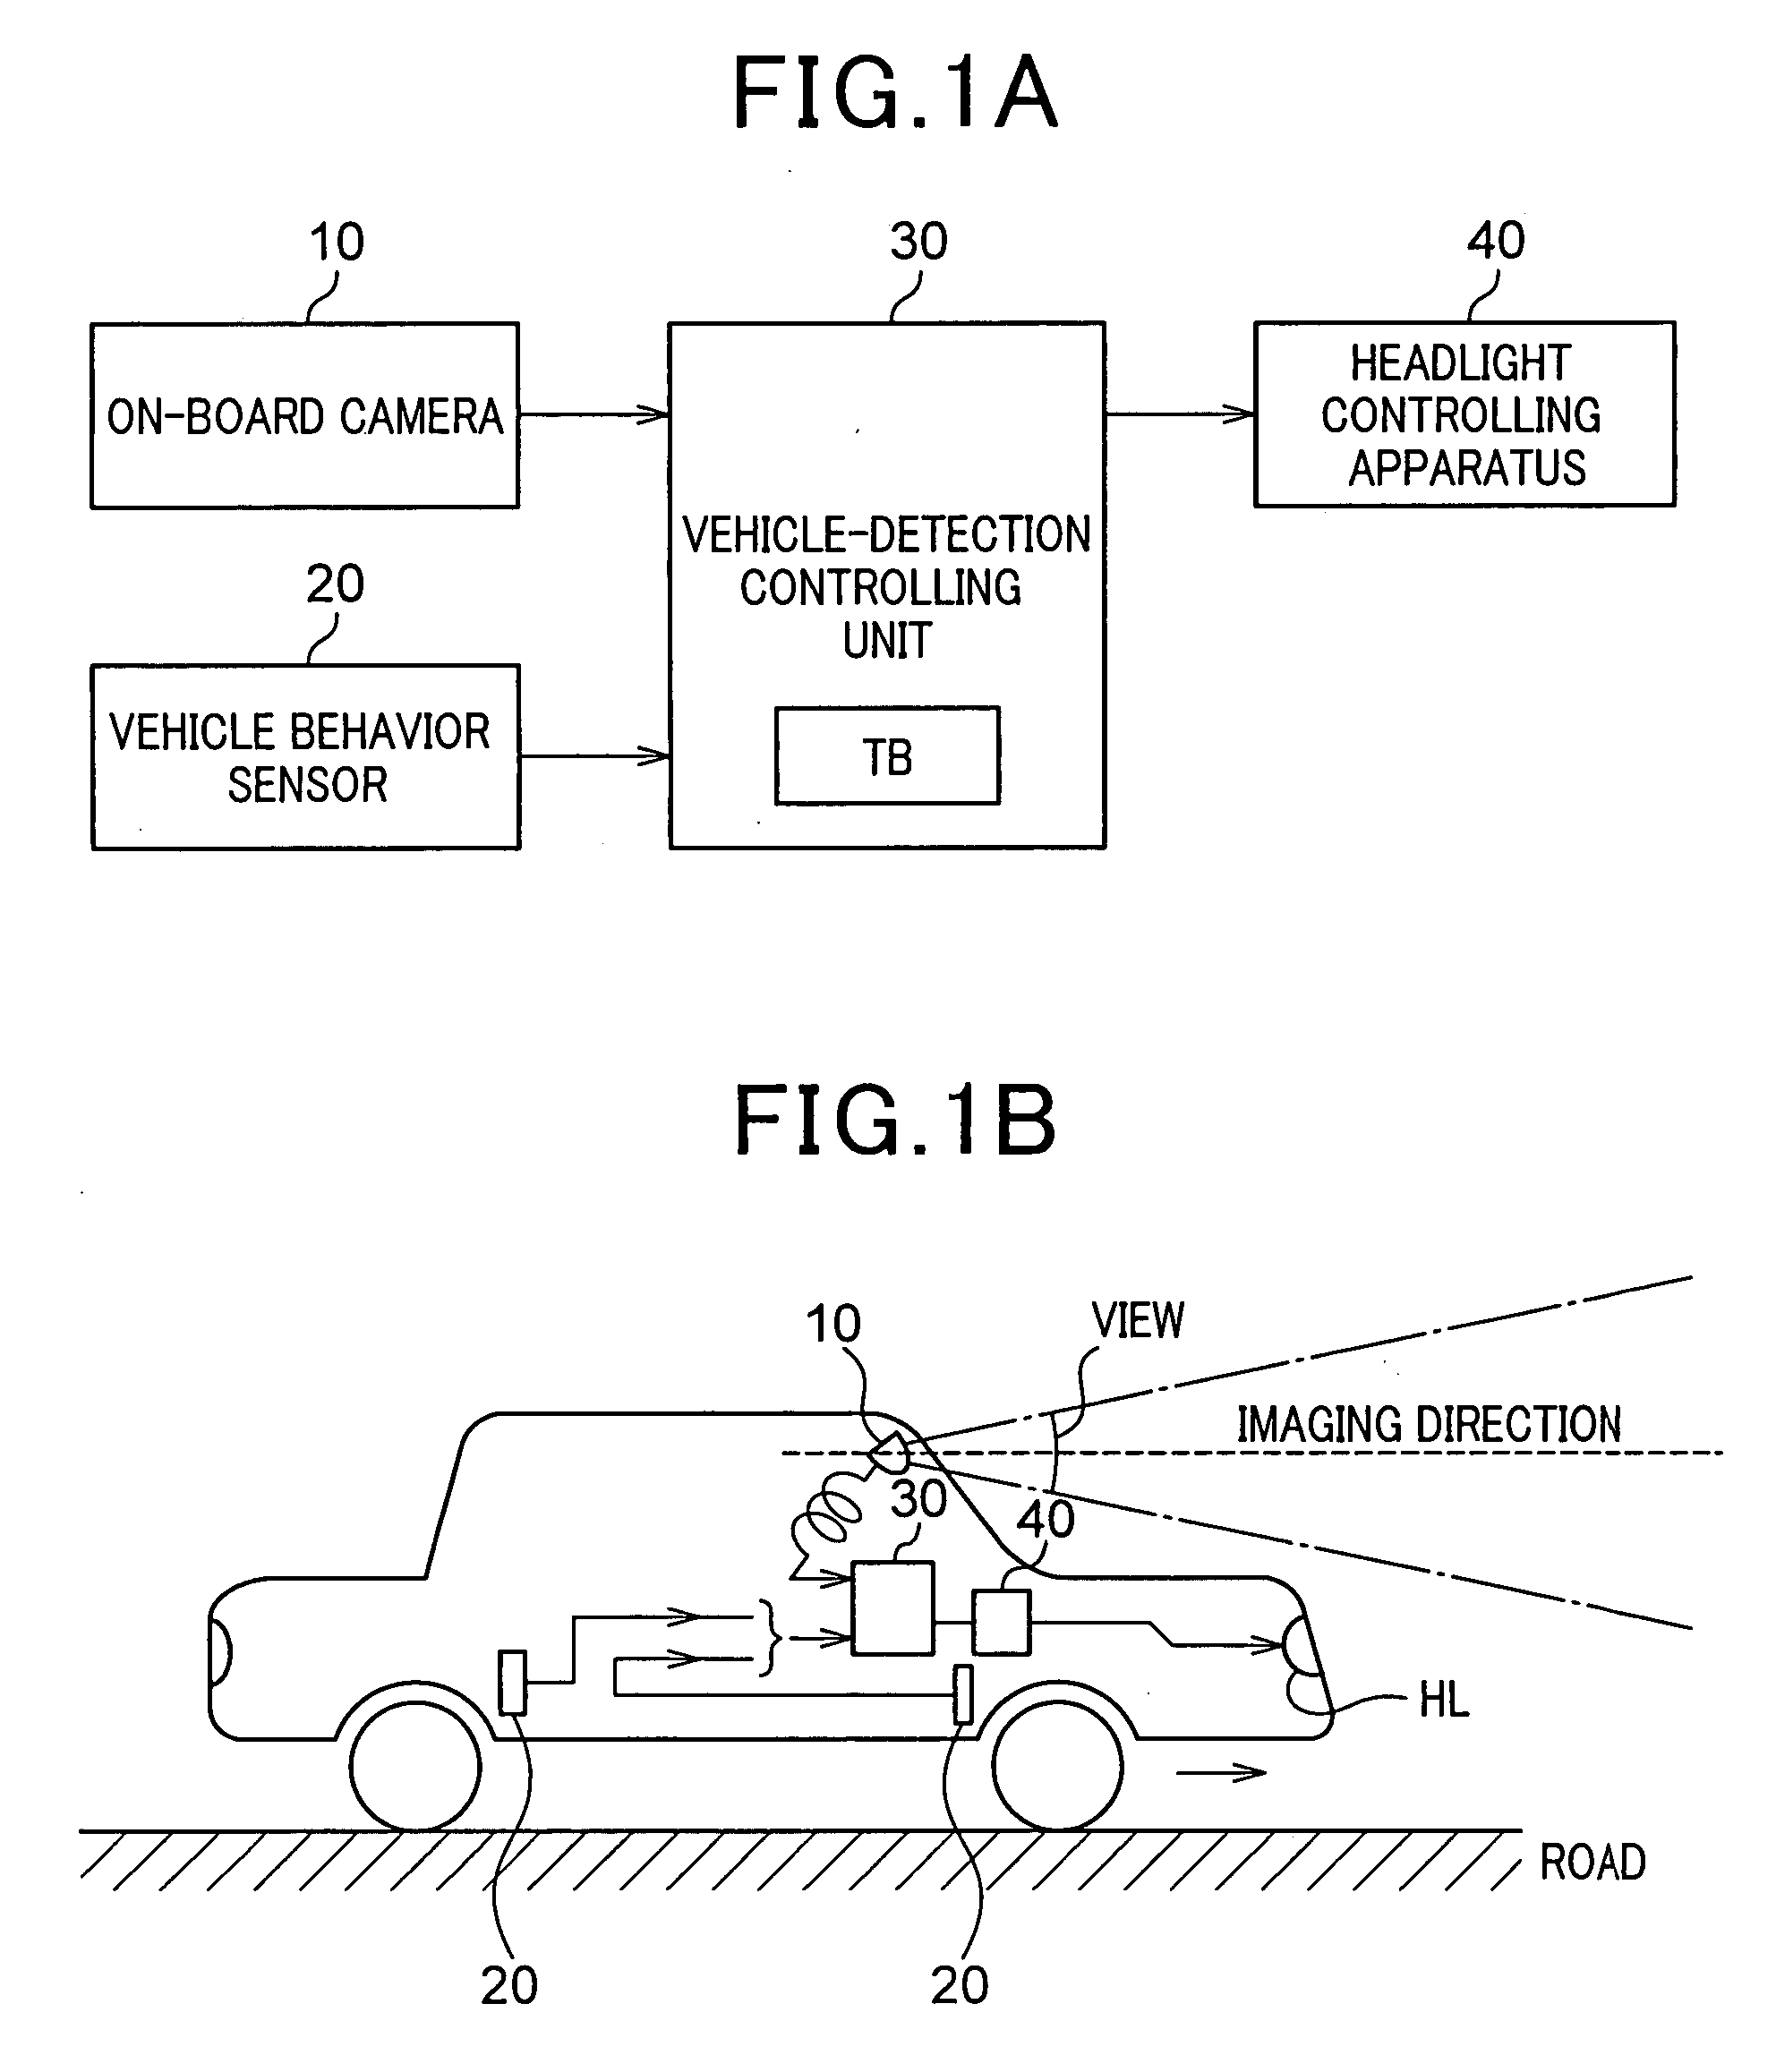 On-board device for detecting vehicles and apparatus for controlling headlights using the device